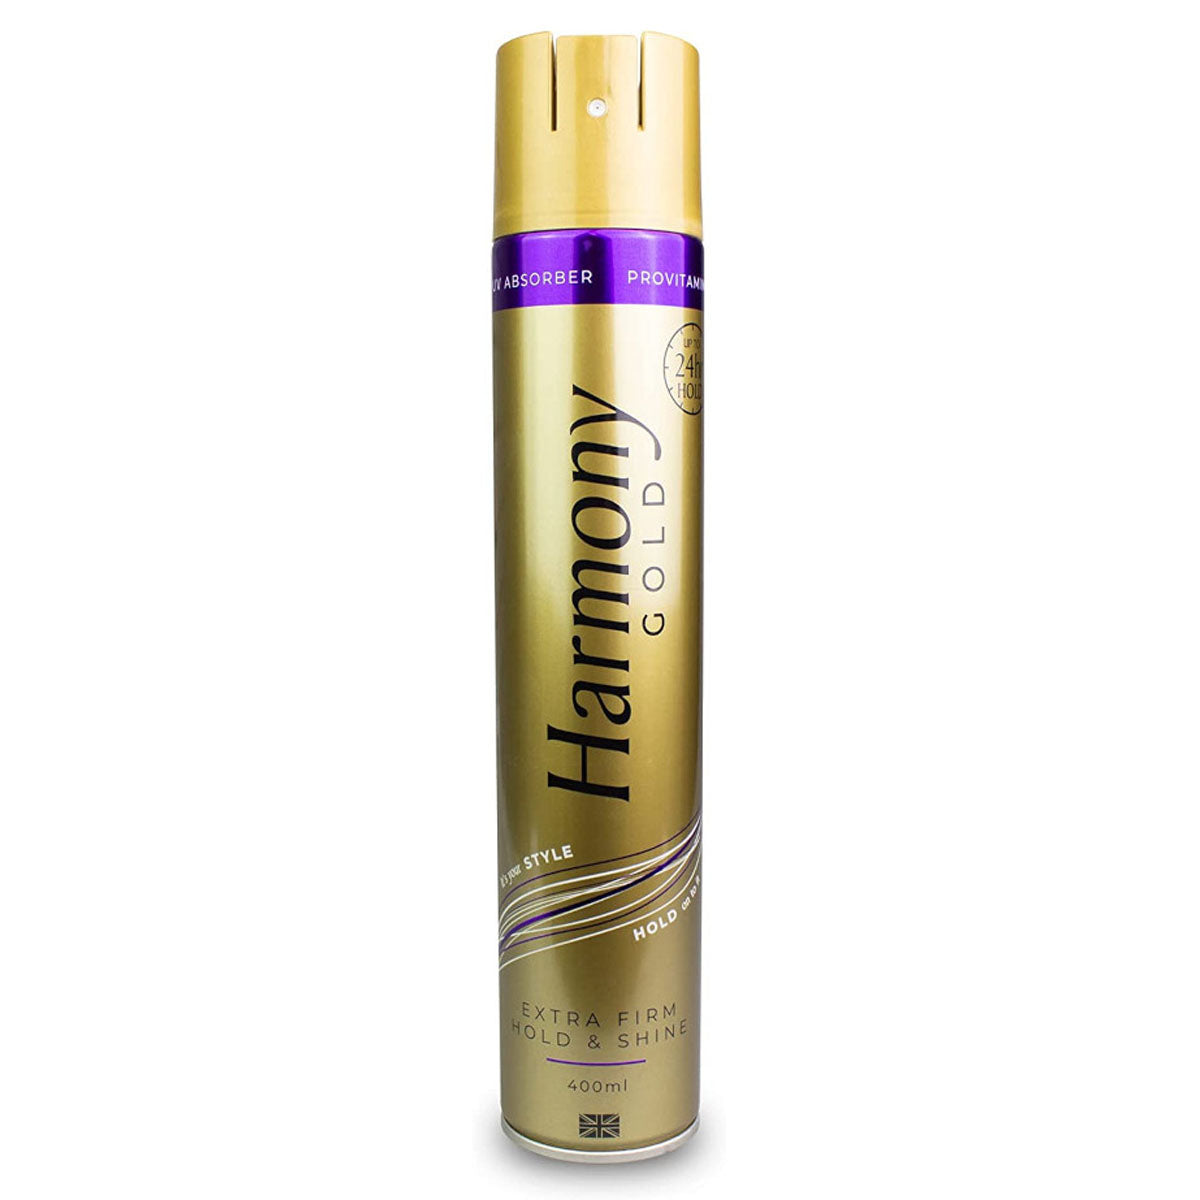 Harmony - Gold Extra Firm Hold & Shine Hairspray - 400ml - Continental Food Store